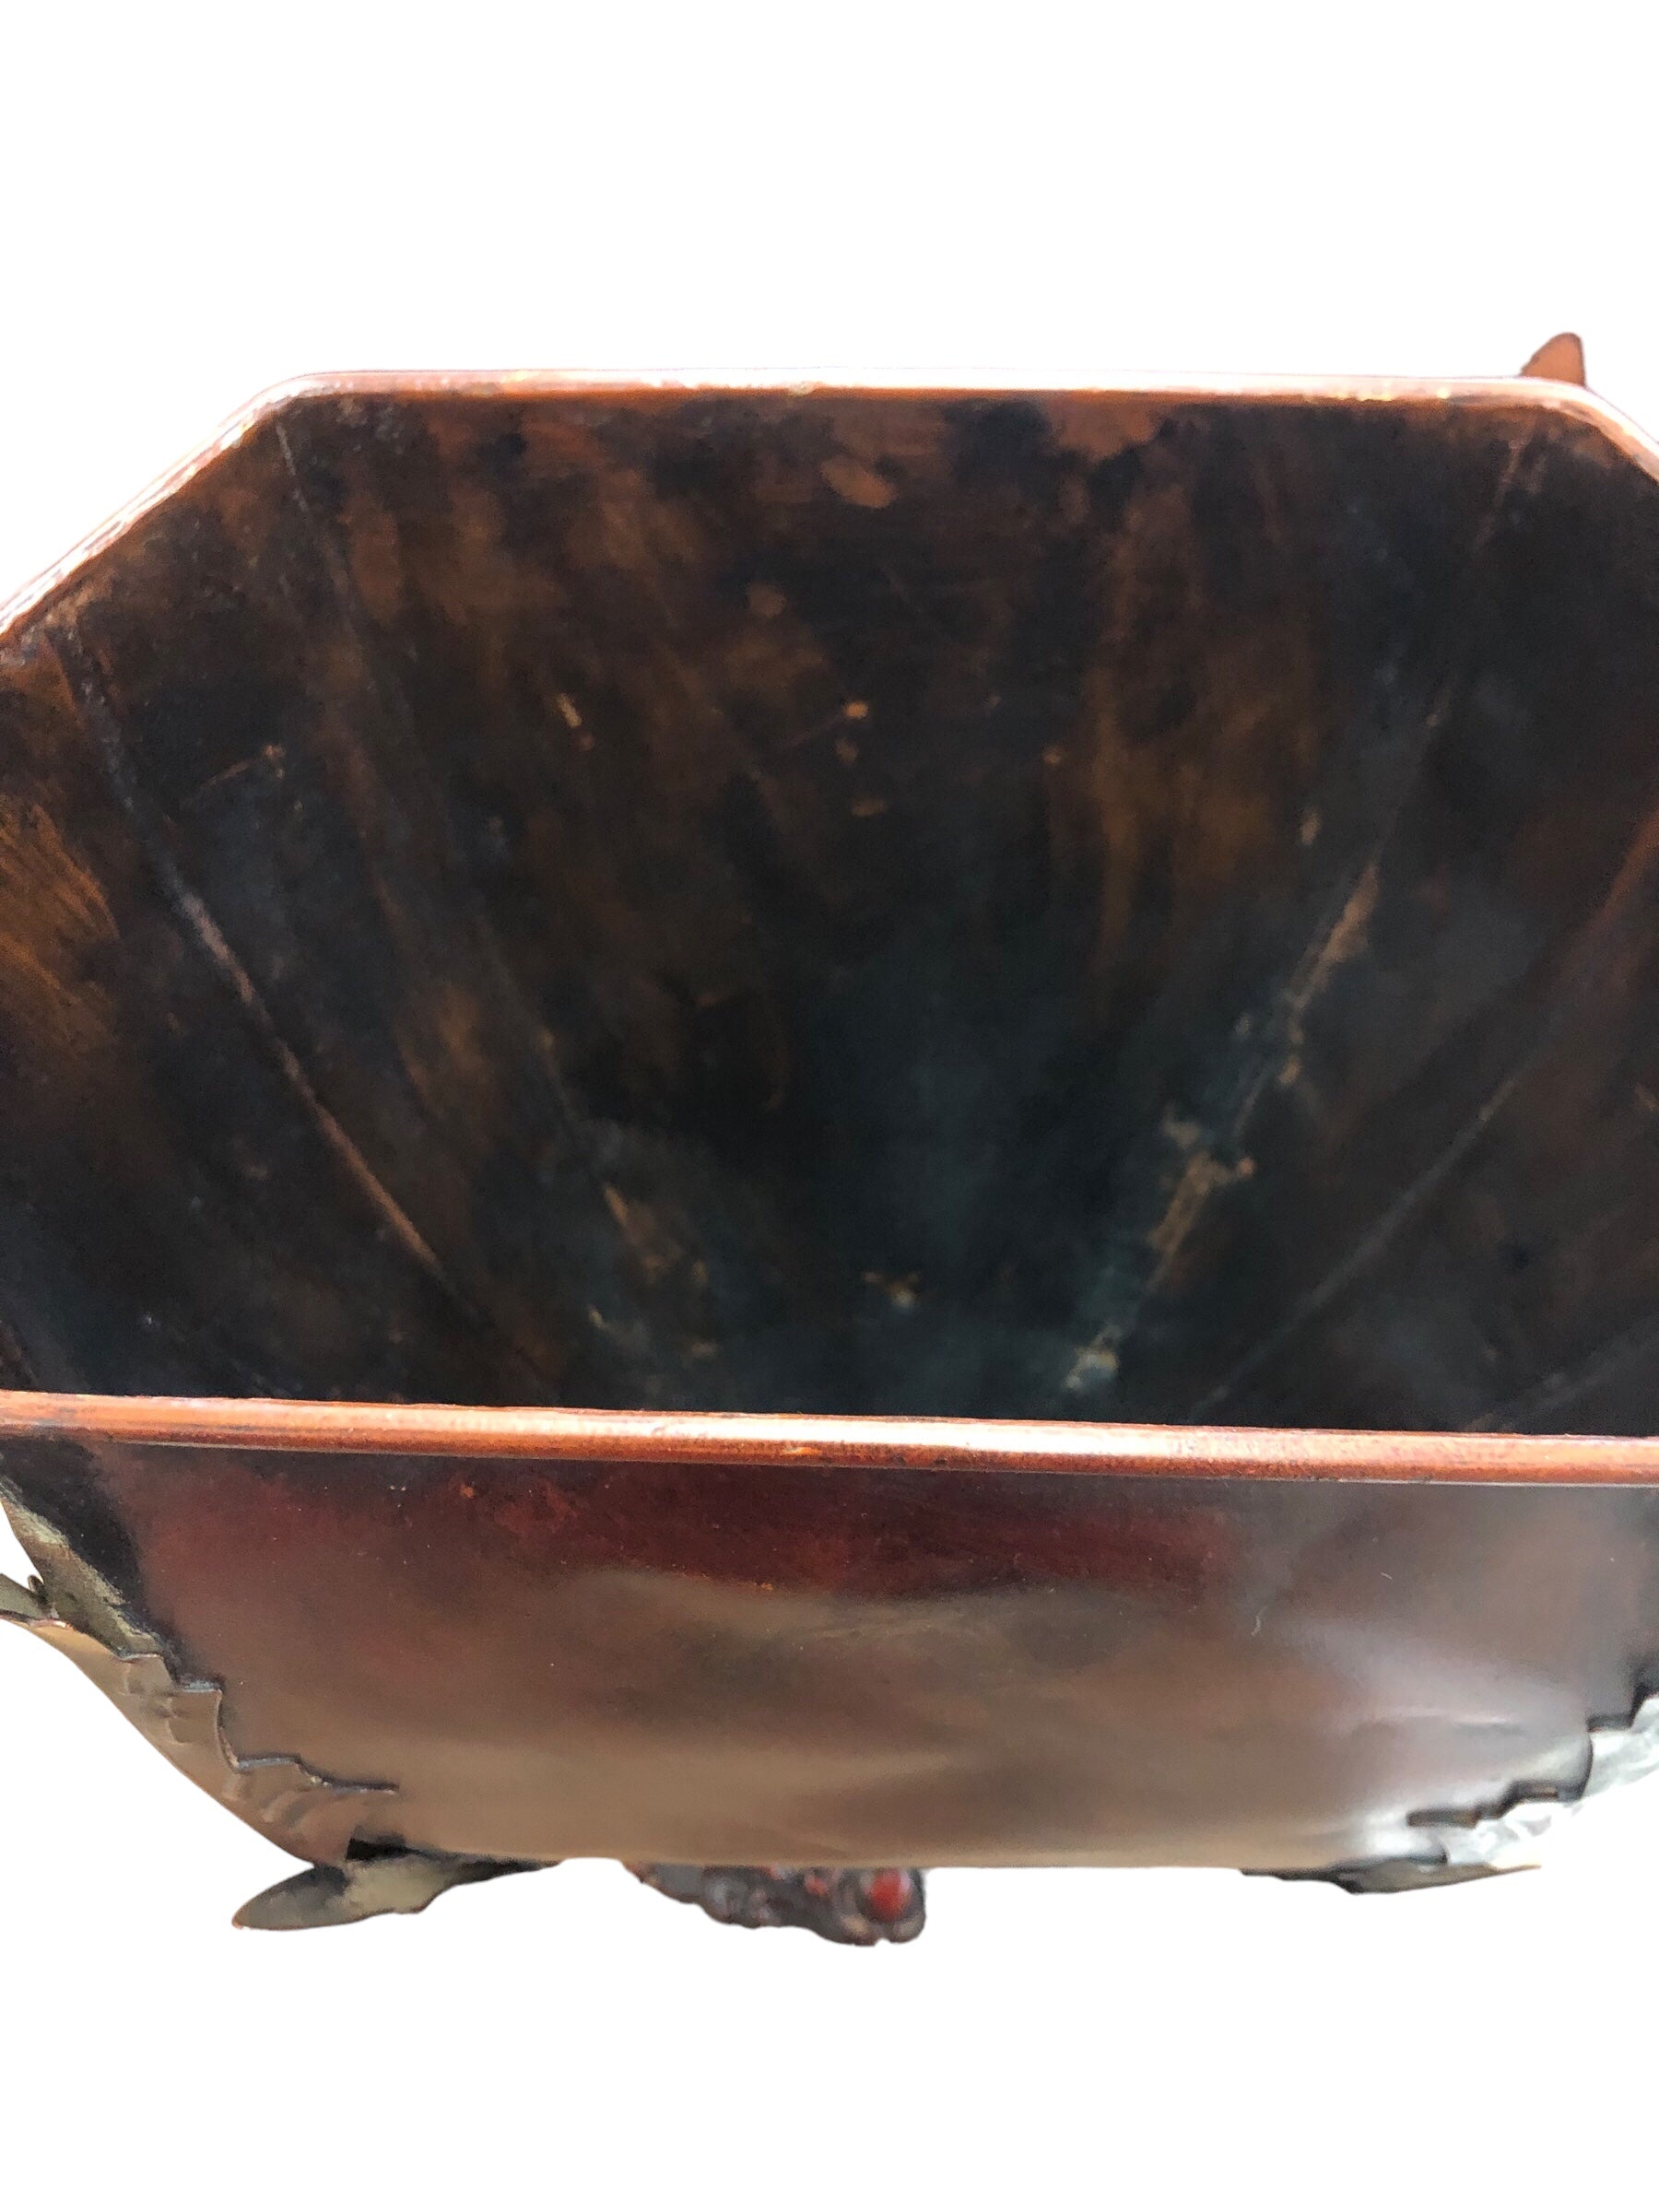 Large Tin Urn with Handles